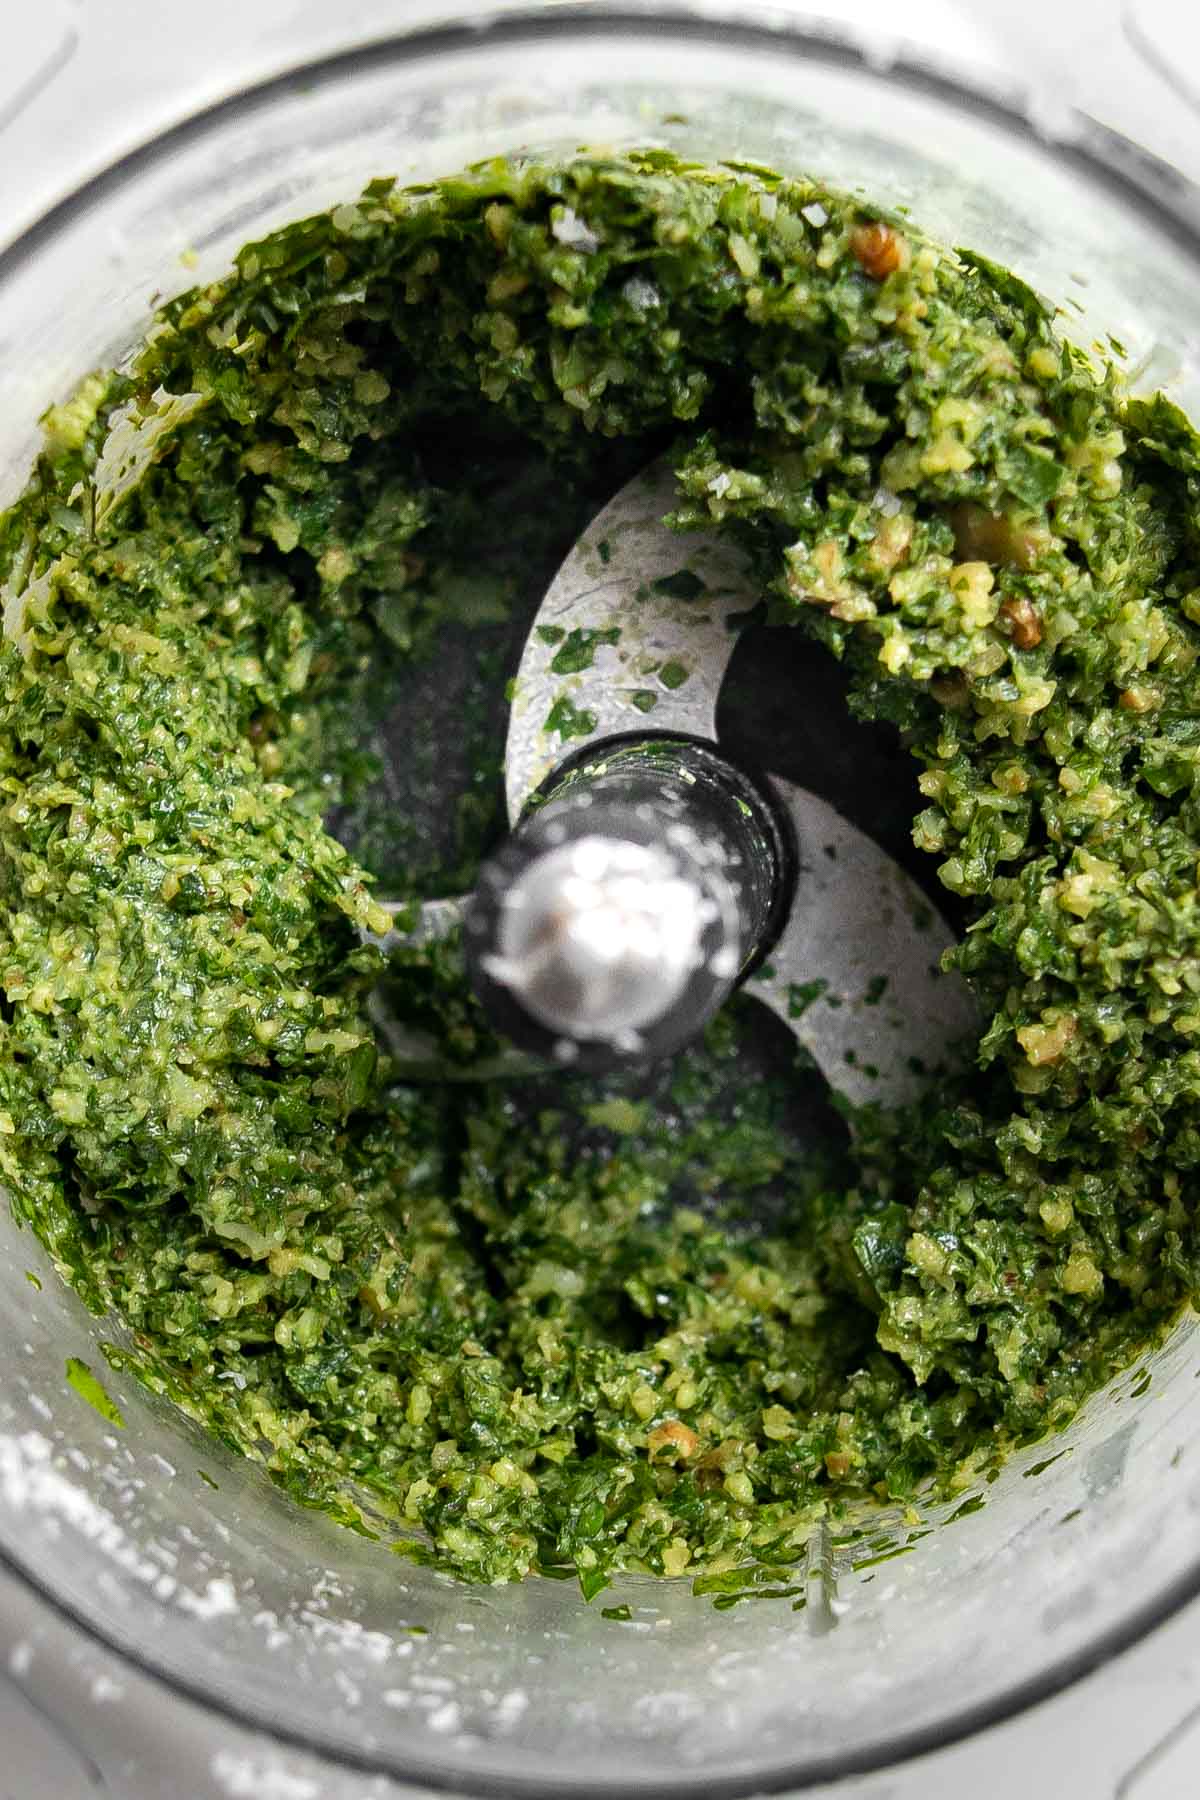 oil added to pesto and blended.